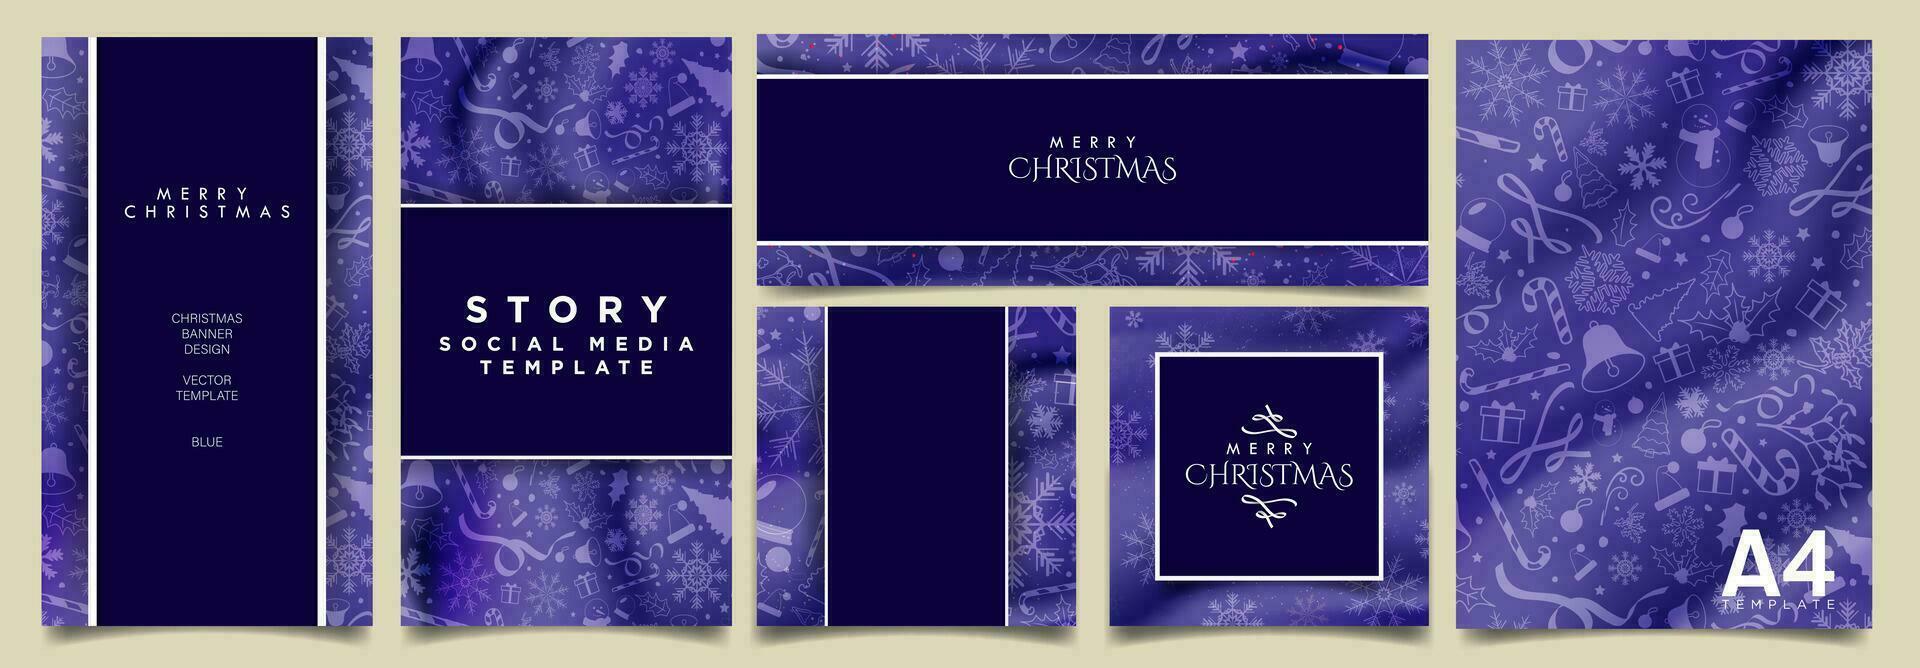 Bright Blue Gradient Christmas Card Poster Templates, greeting cards, poster, banner layouts. Monochromatic Decorative Christmas design templates. Luxurious xmas mock ups. Vector Illustration. EPS 10.